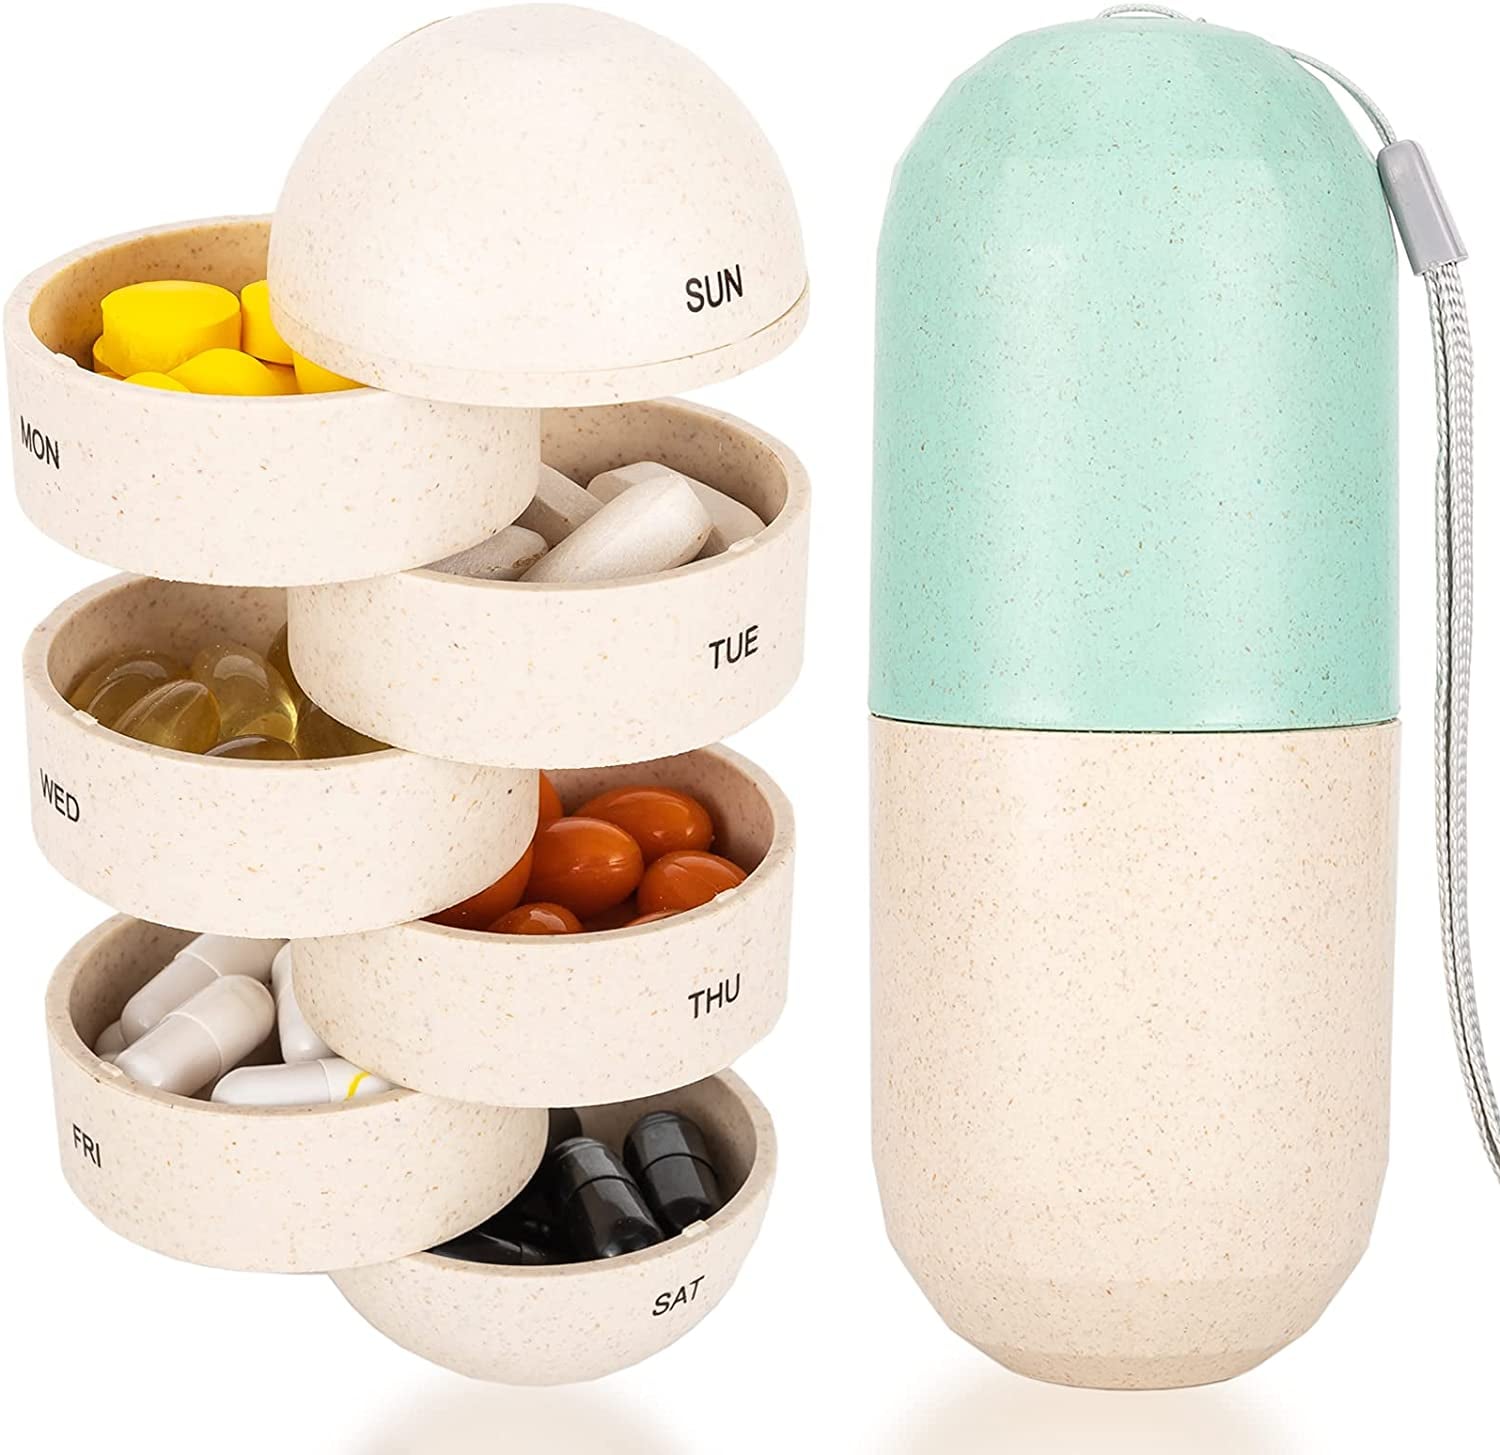 20 Cute Pill Organizers and Cases  POPSUGAR Fitness